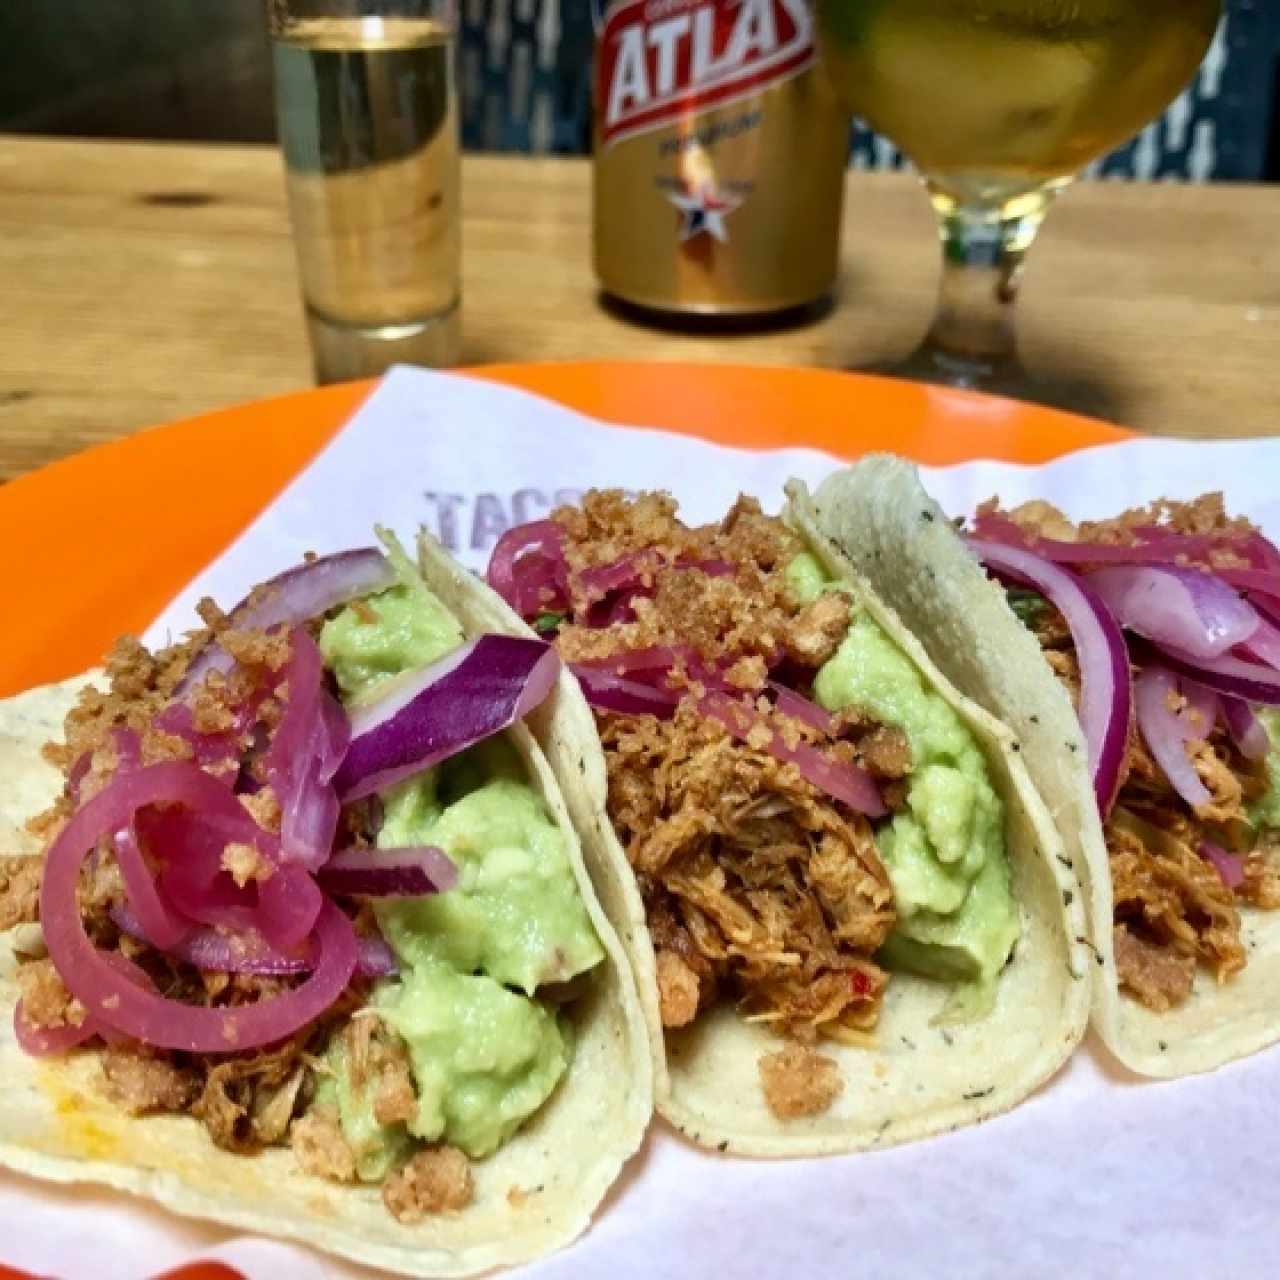 Cochinita Pibil, guac is not really authentic but very tasty